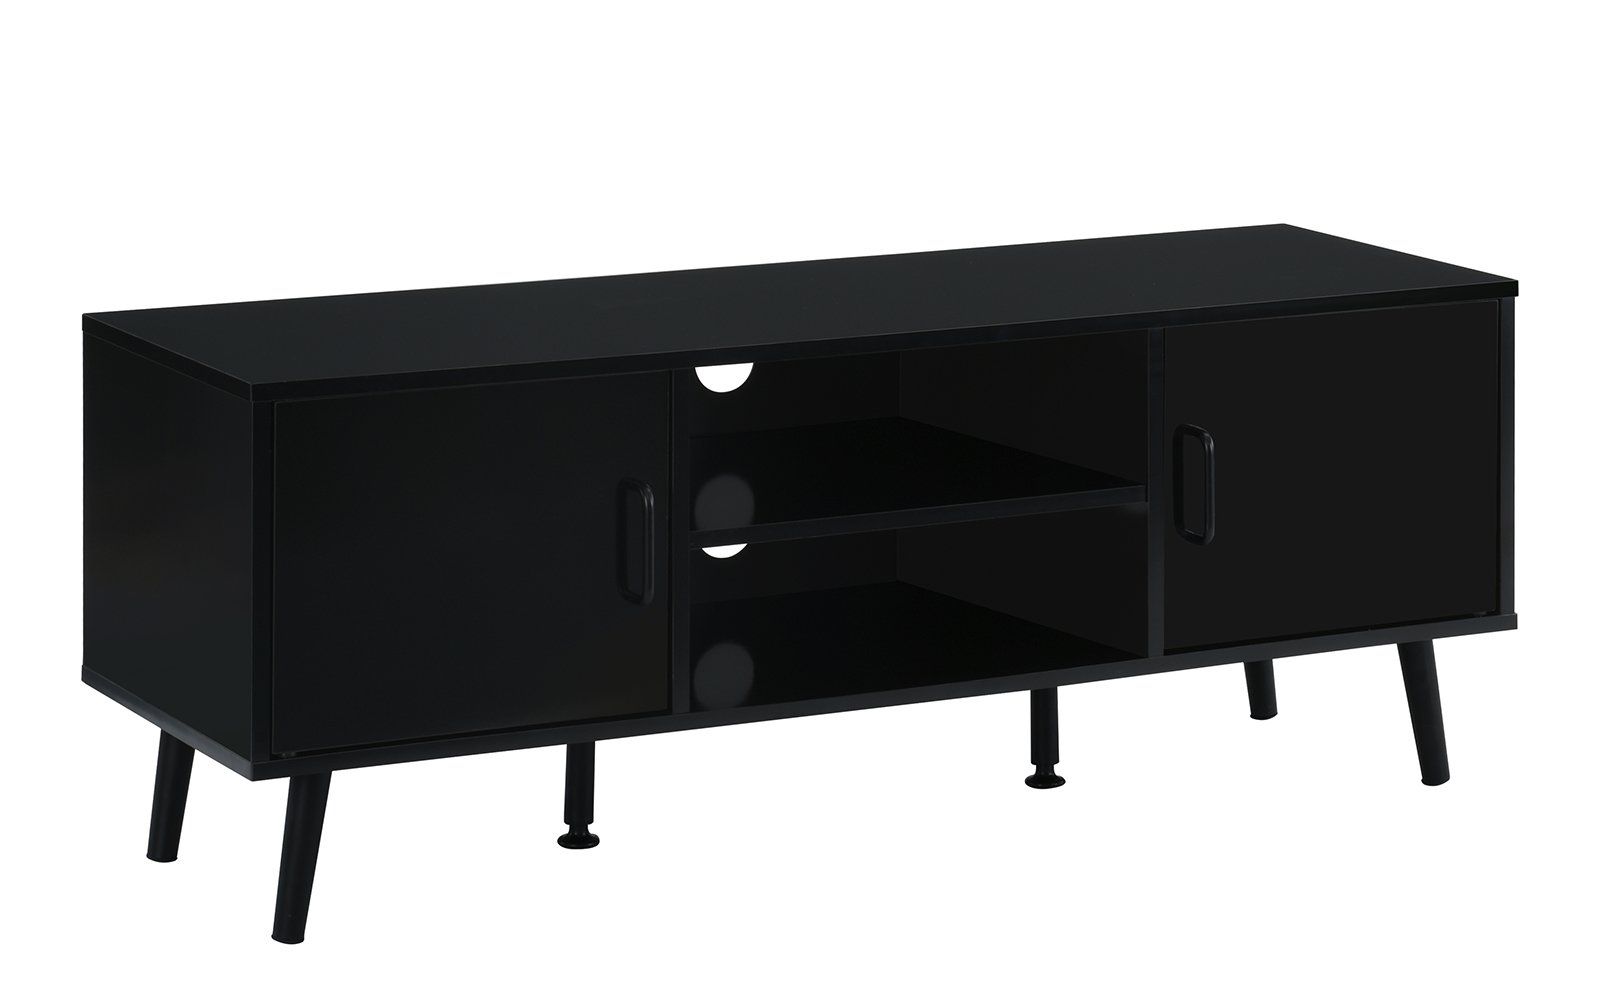 Mid Century Modern Tv Stand (black) 662187612447 | Ebay Inside Contemporary Black Tv Stands (View 11 of 15)